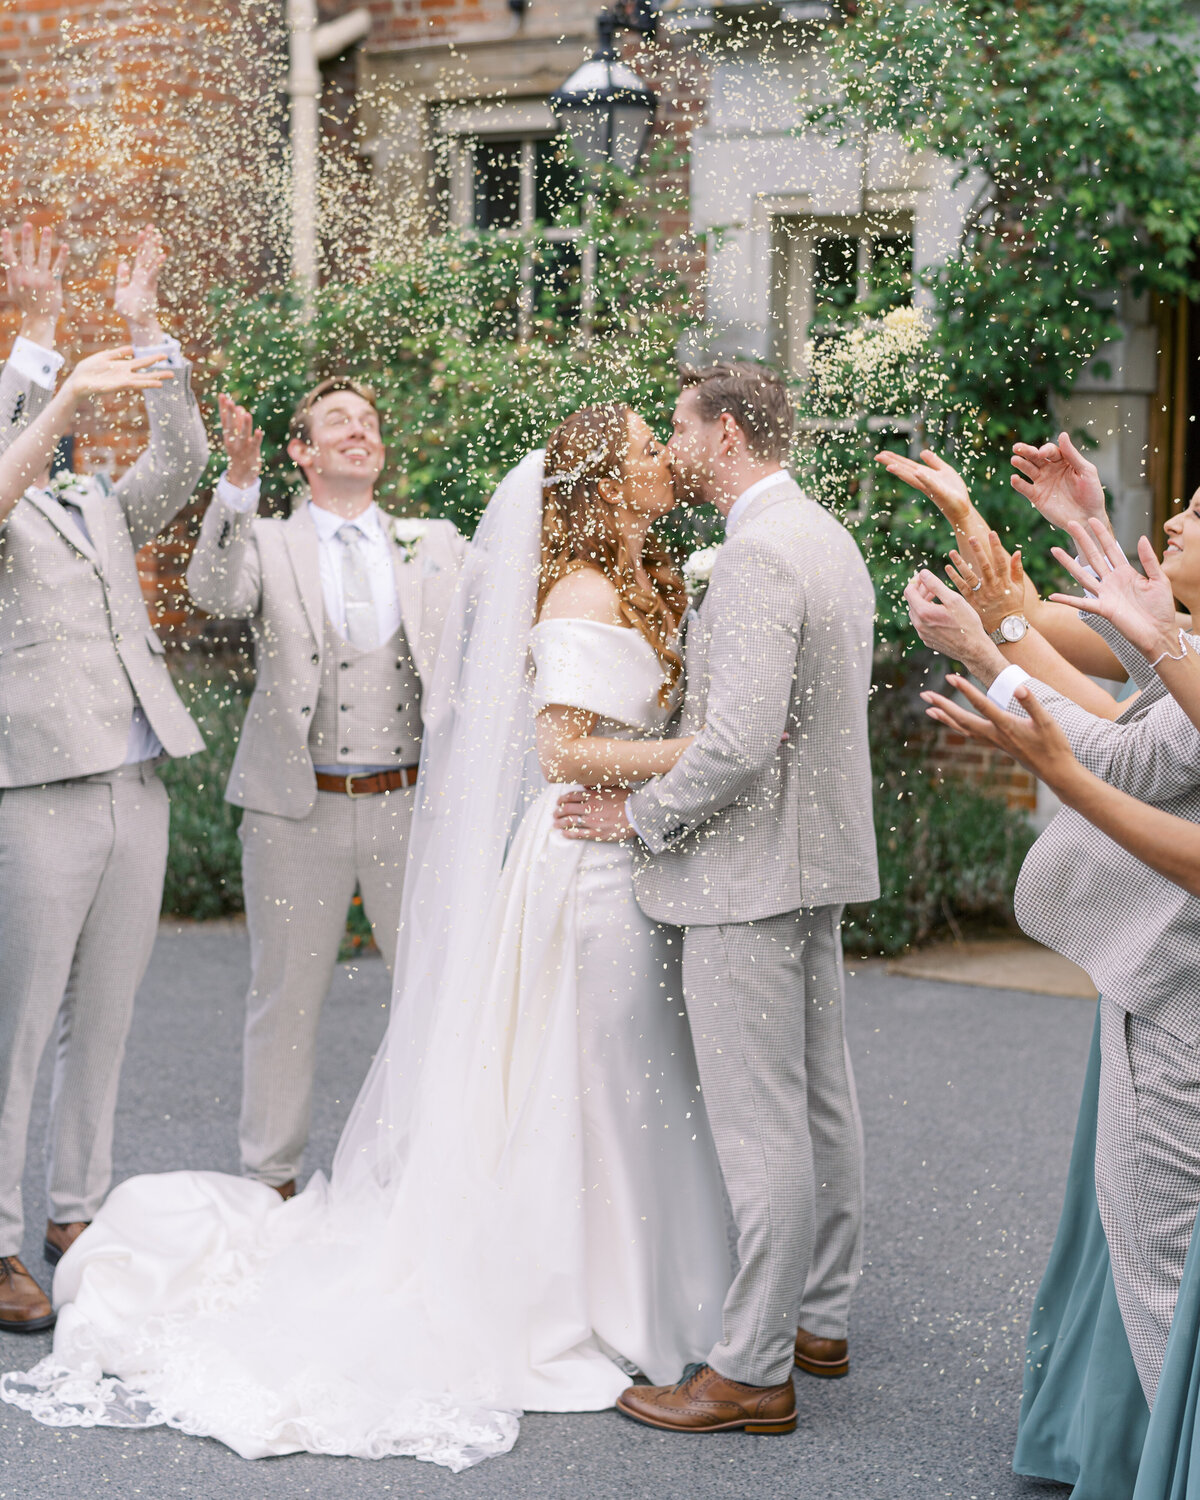 Bride and groom confetti at Lainston House wedding venue in Hampshire